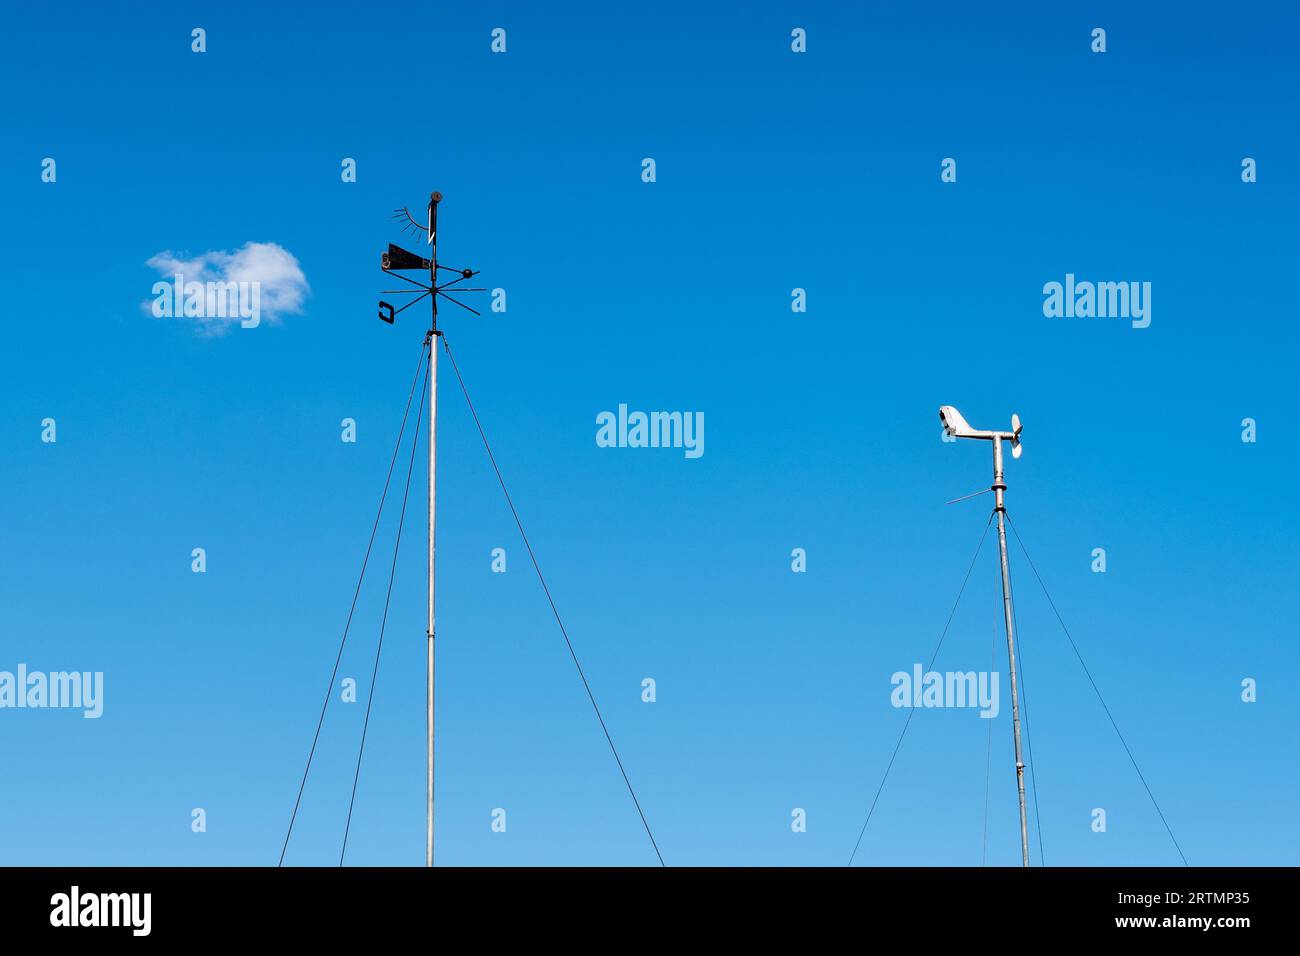 Windmill for weather forecasting on a background of blue sky Stock Photo